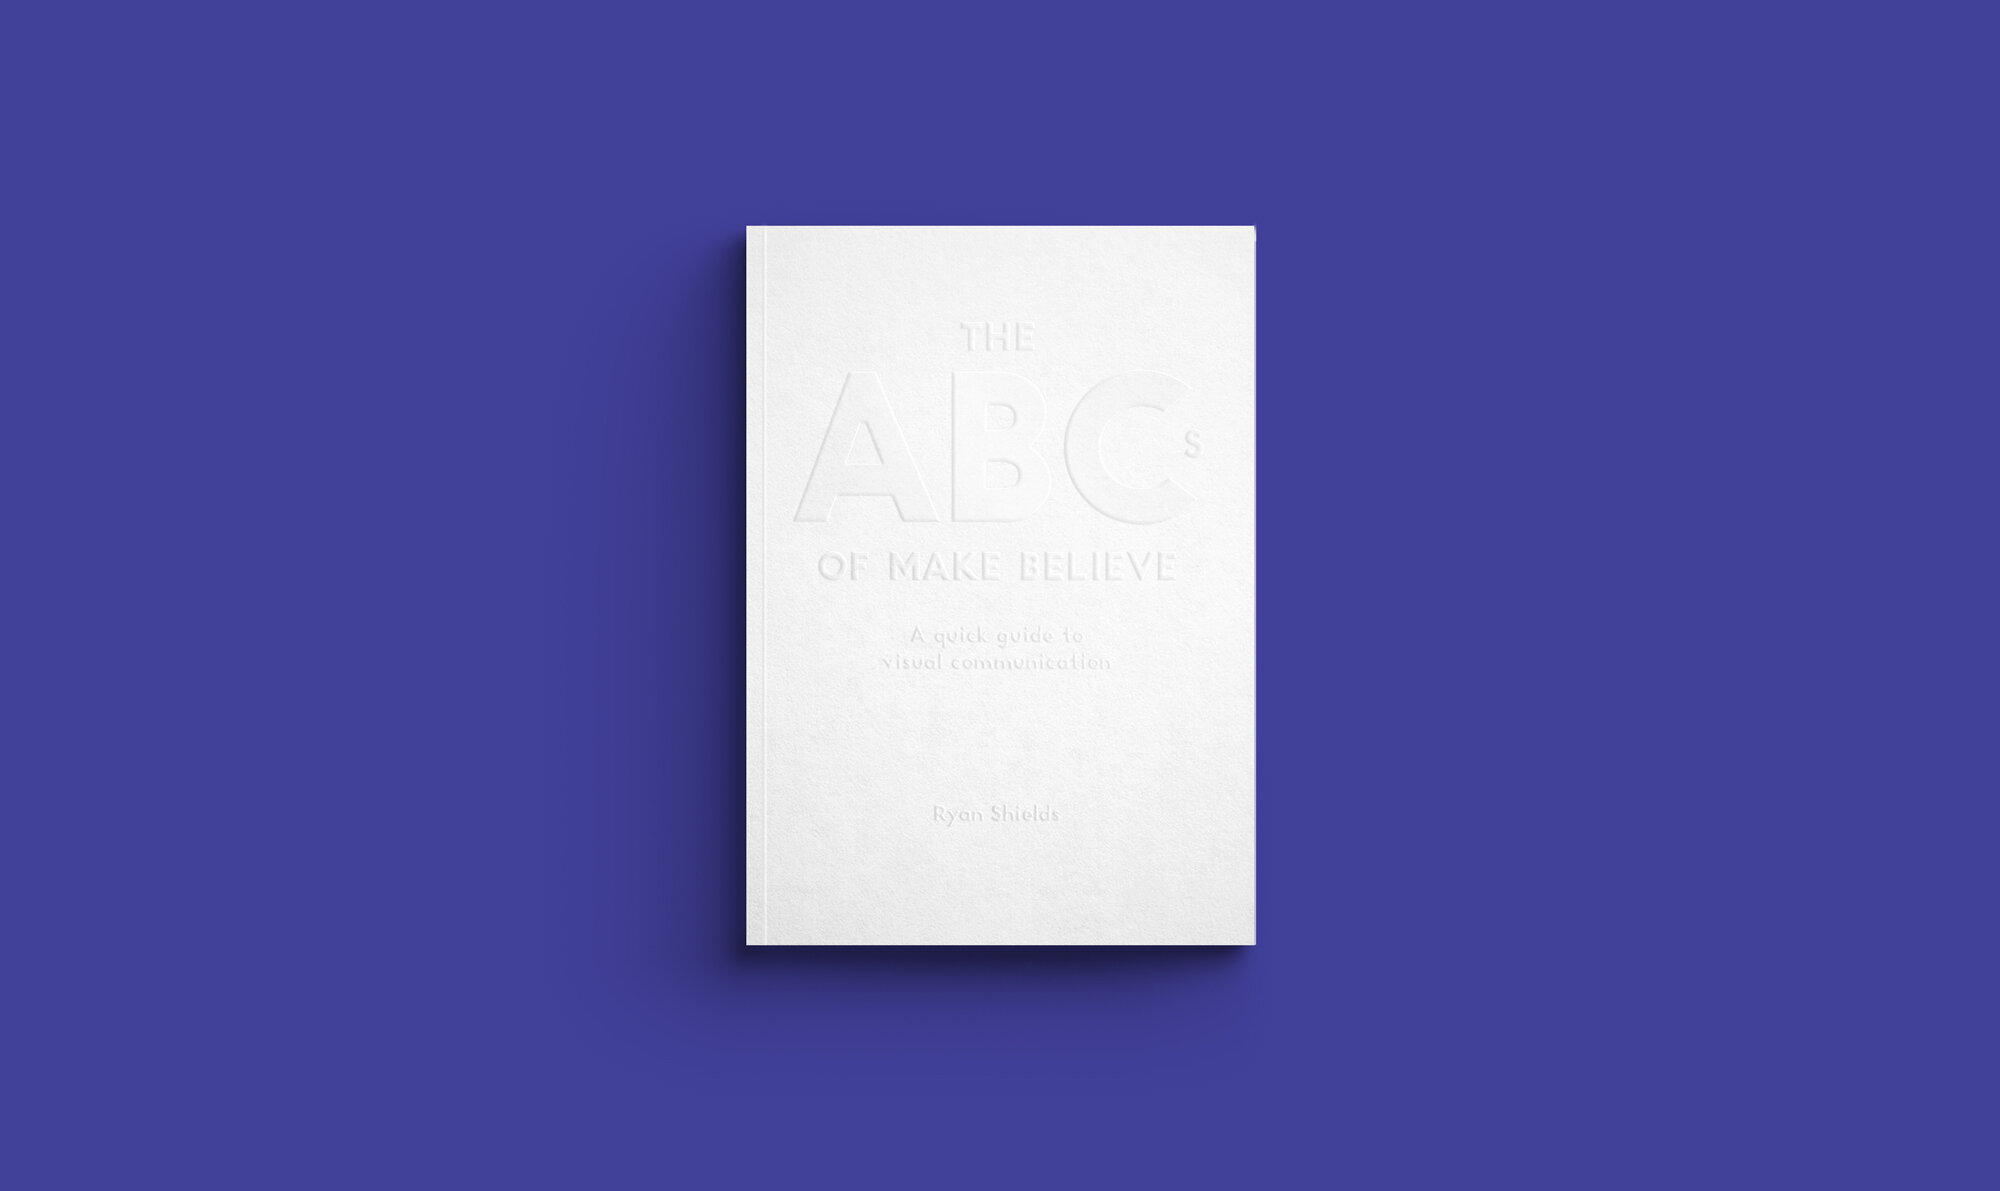  The ABC’s of Make Believe is a quick reference handbook for students of visual communication design.  